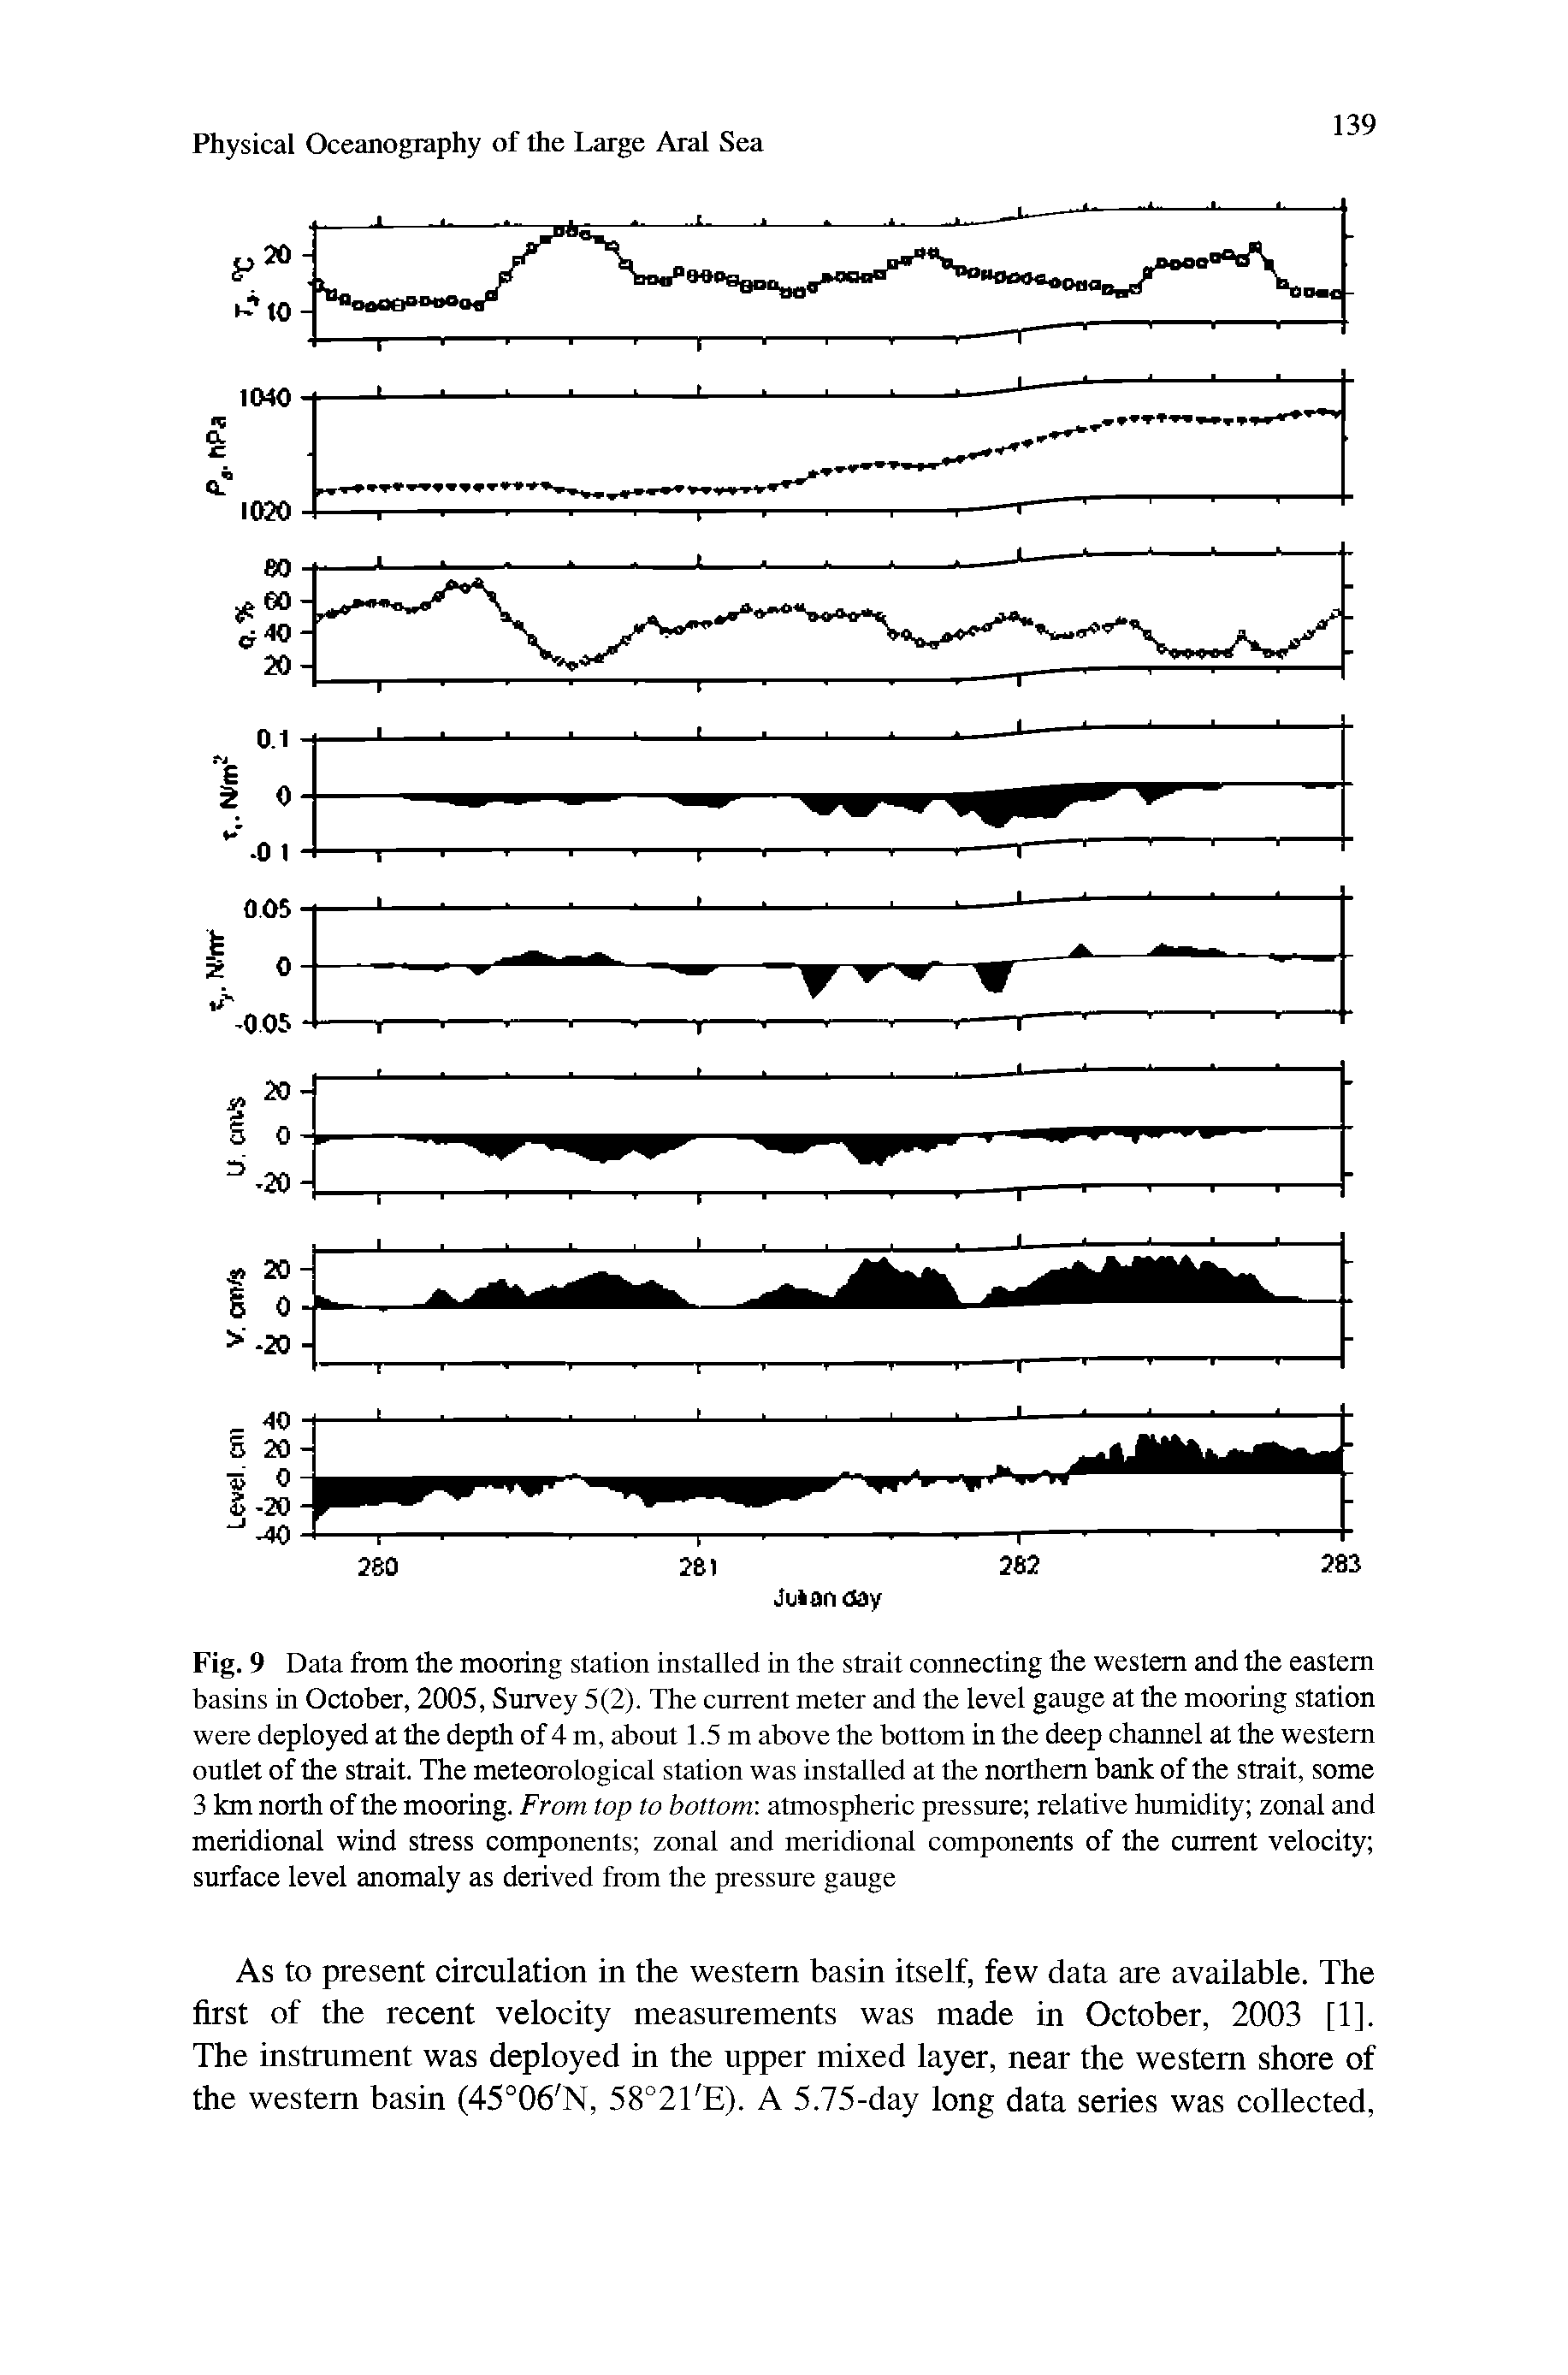 Fig. 9 Data from the mooting station installed in the strait connecting the western and the eastern basins in October, 2005, Survey 5(2). The current meter and the level gauge at the mooring station were deployed at the depth of 4 m, about 1.5 m above the bottom in the deep channel at the western outlet of the strait. The meteorological station was installed at the northern bank of the strait, some 3 km north of the mooring. From top to bottom atmospheric pressure relative humidity zonal and meridional wind stress components zonal and meridional components of the current velocity surface level anomaly as derived from the pressure gauge...